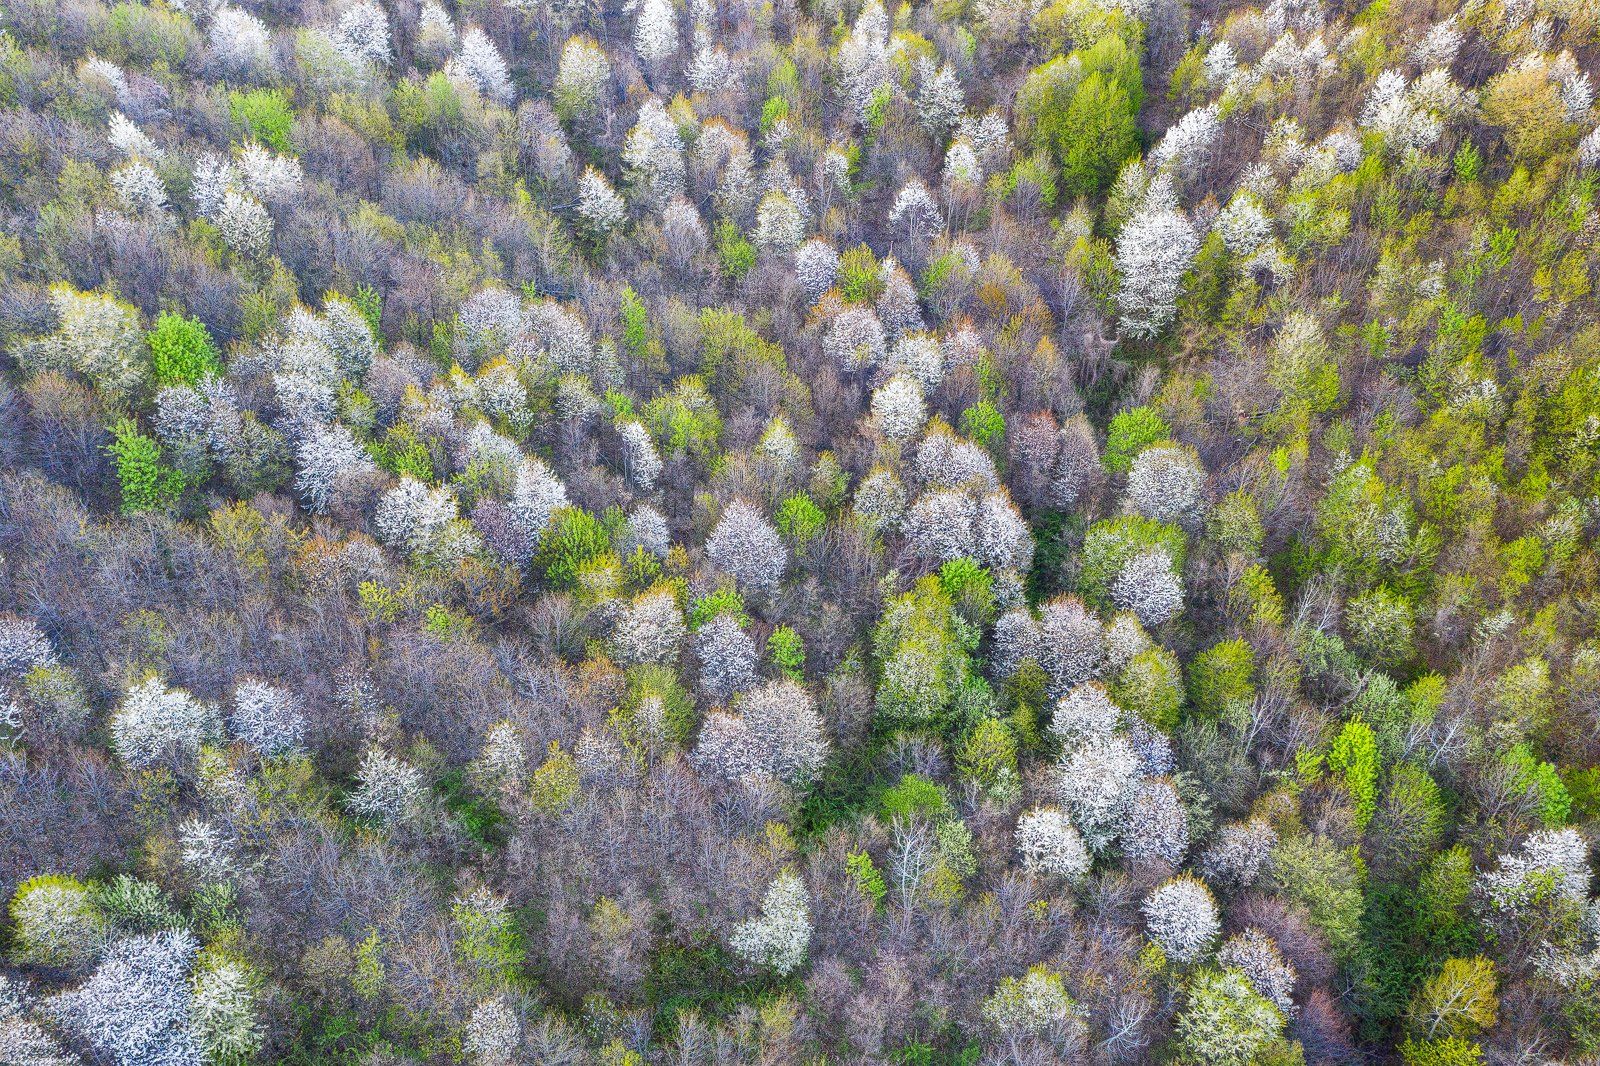 #nature #aerial #cherry #blossom #forest #springtime #beauty #fresh colors #springcolors, Gheorghe Popa